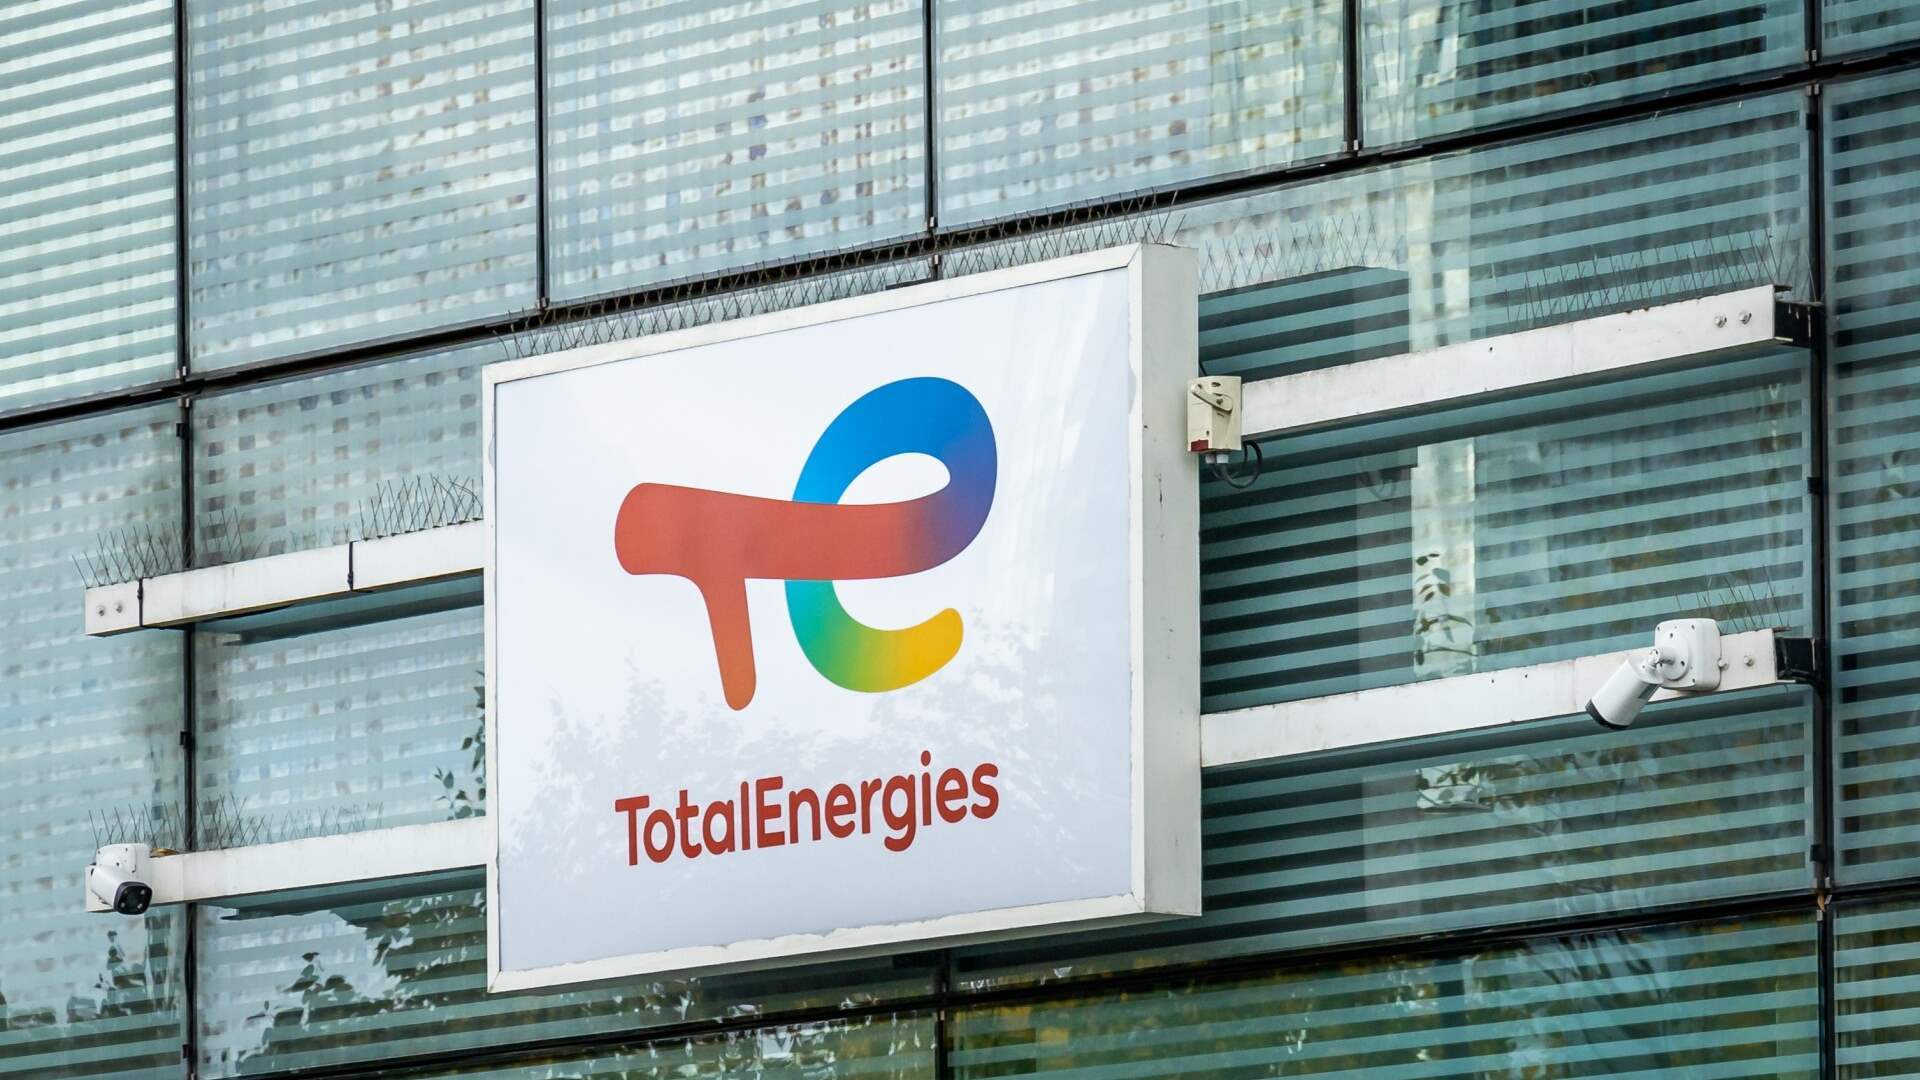 Leaping forward: TotalEnergies EP Lebanon sets sights on Bloc 9 drilling license